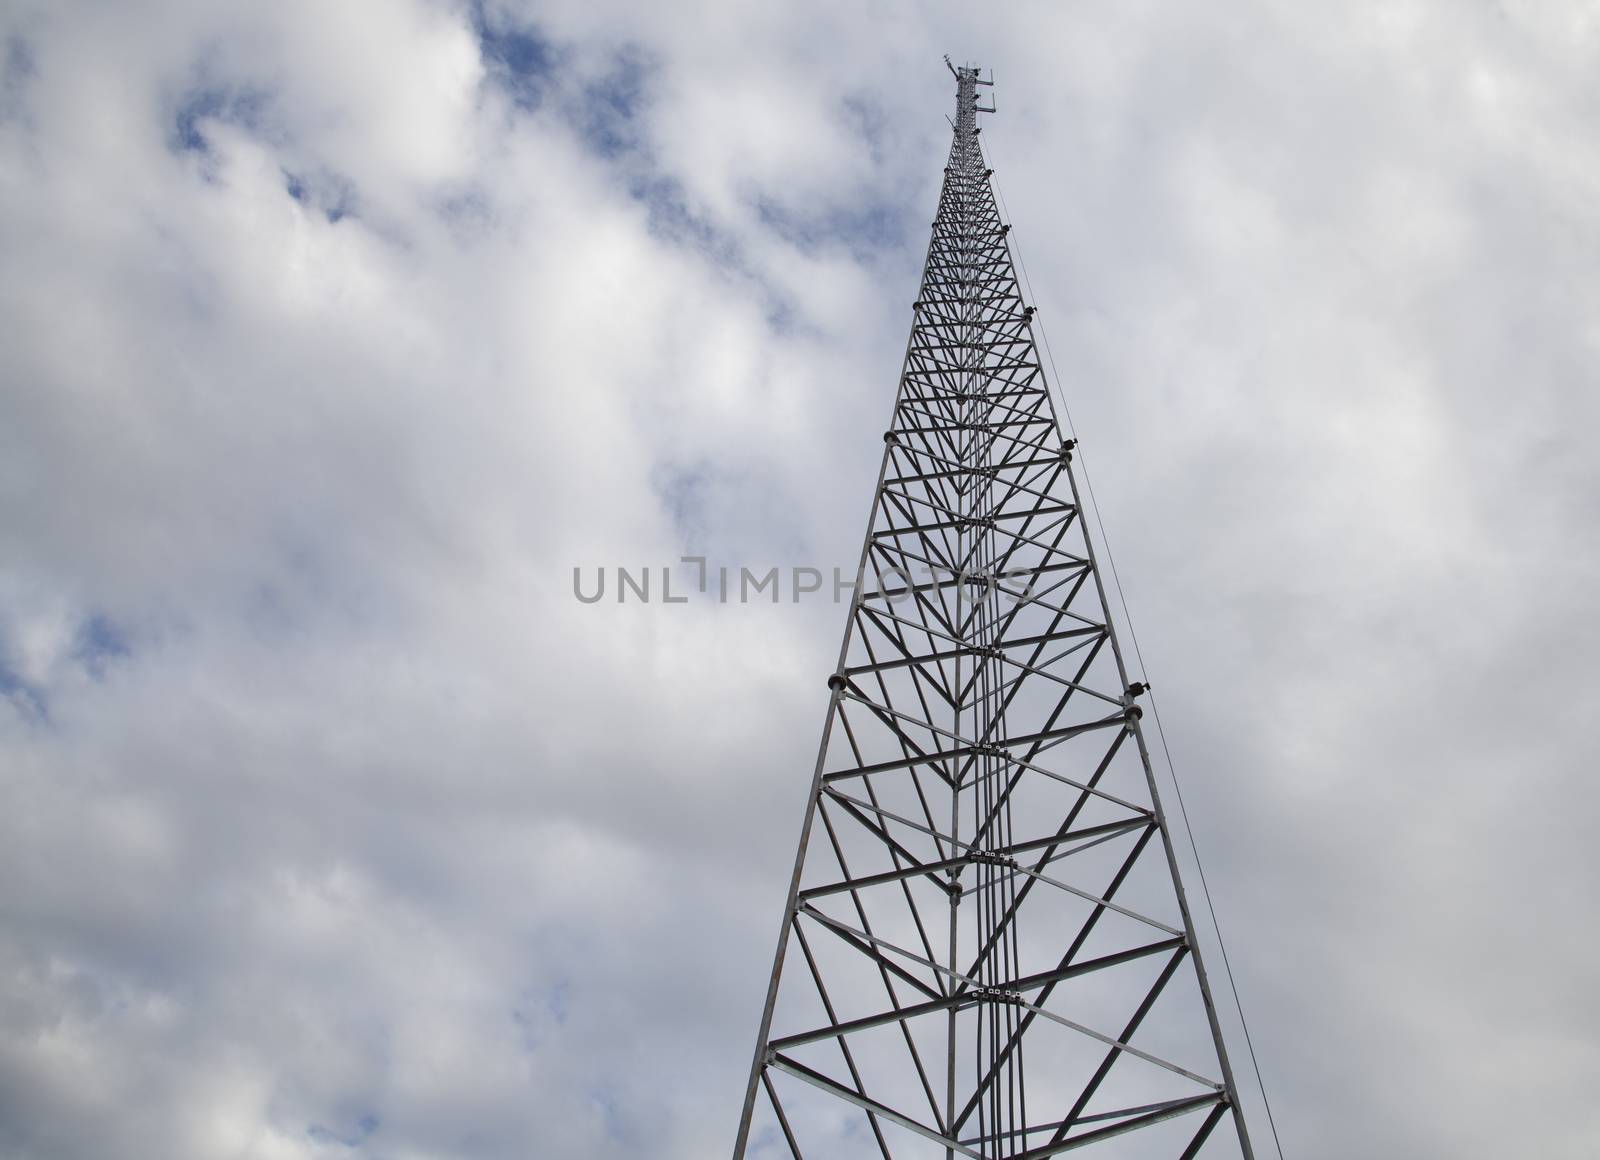 Satellite tower with diminishing perspective